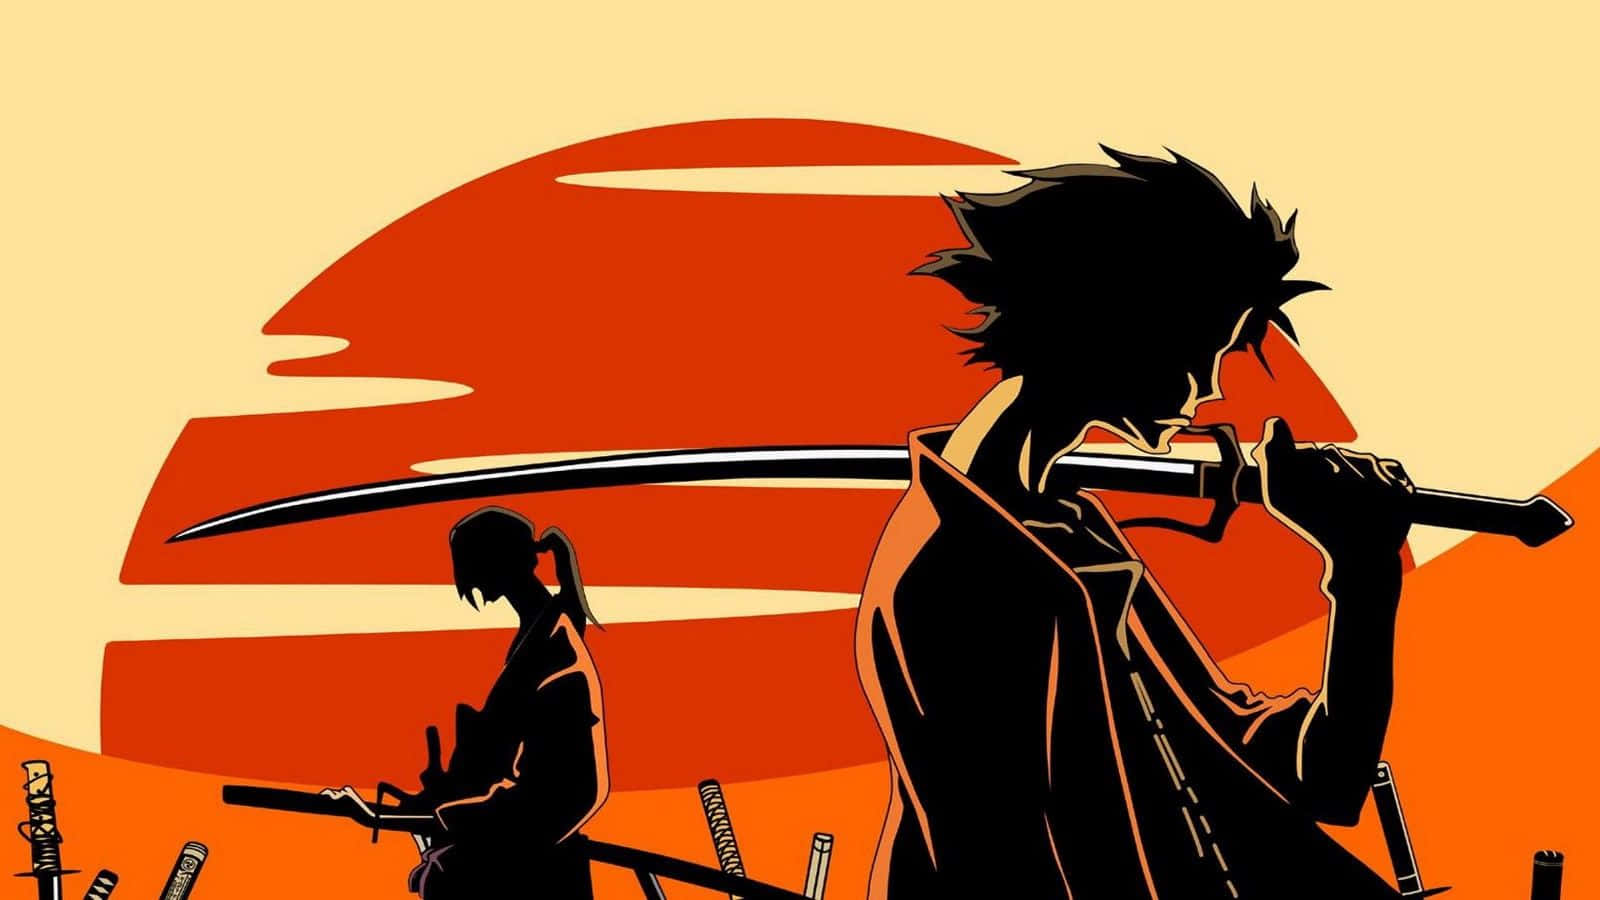 A Silhouette Of Two People Holding Swords In The Sun Wallpaper